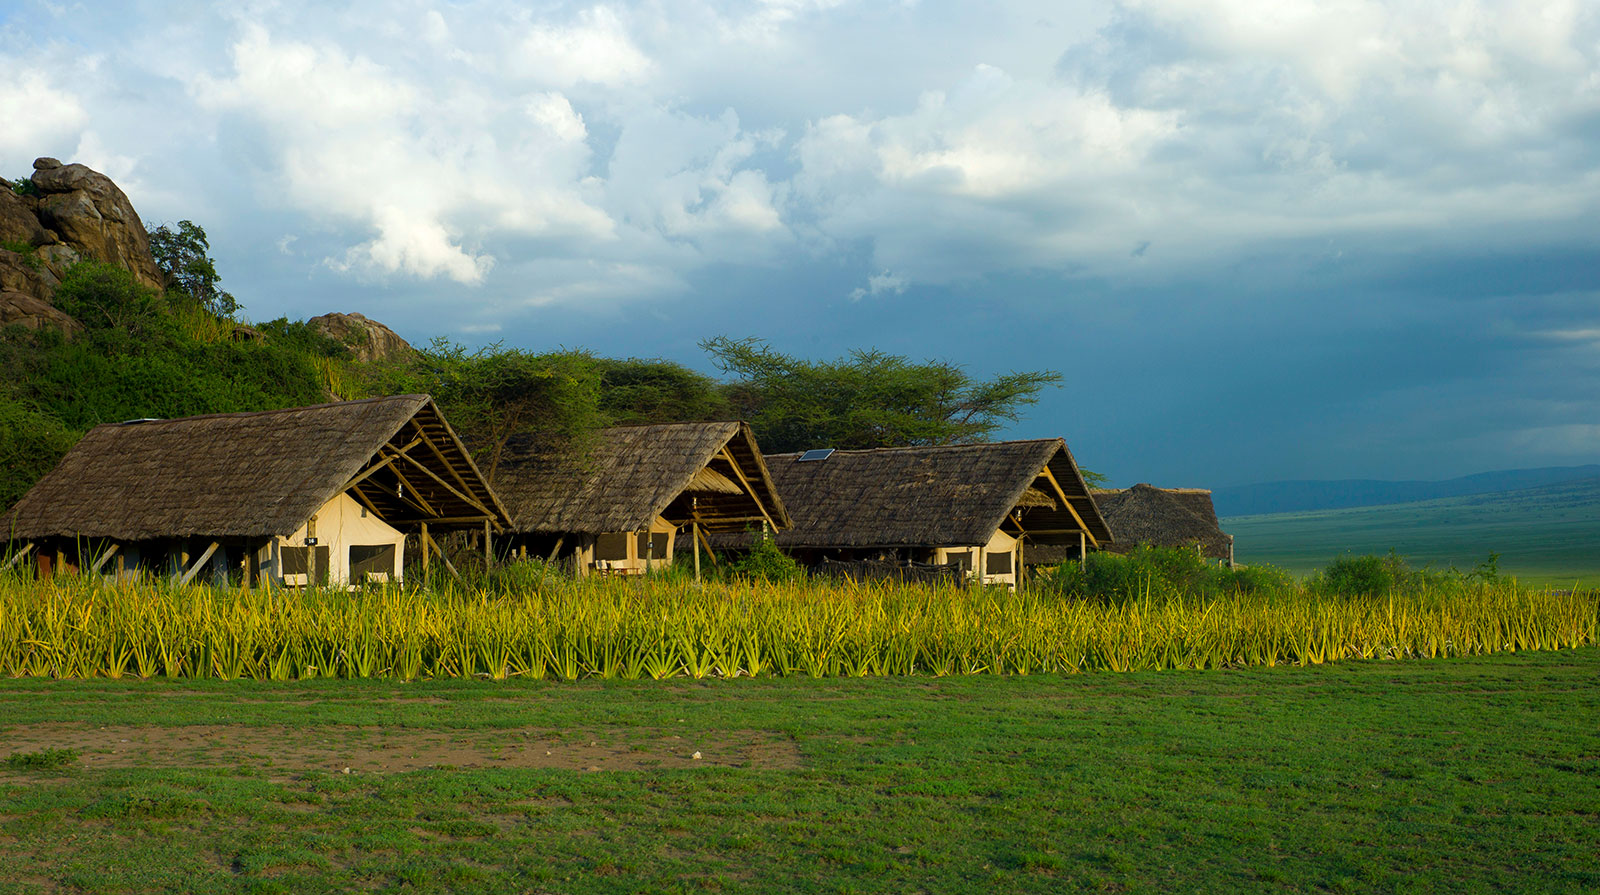 Olduvai Camp - Comfort and authenticity
